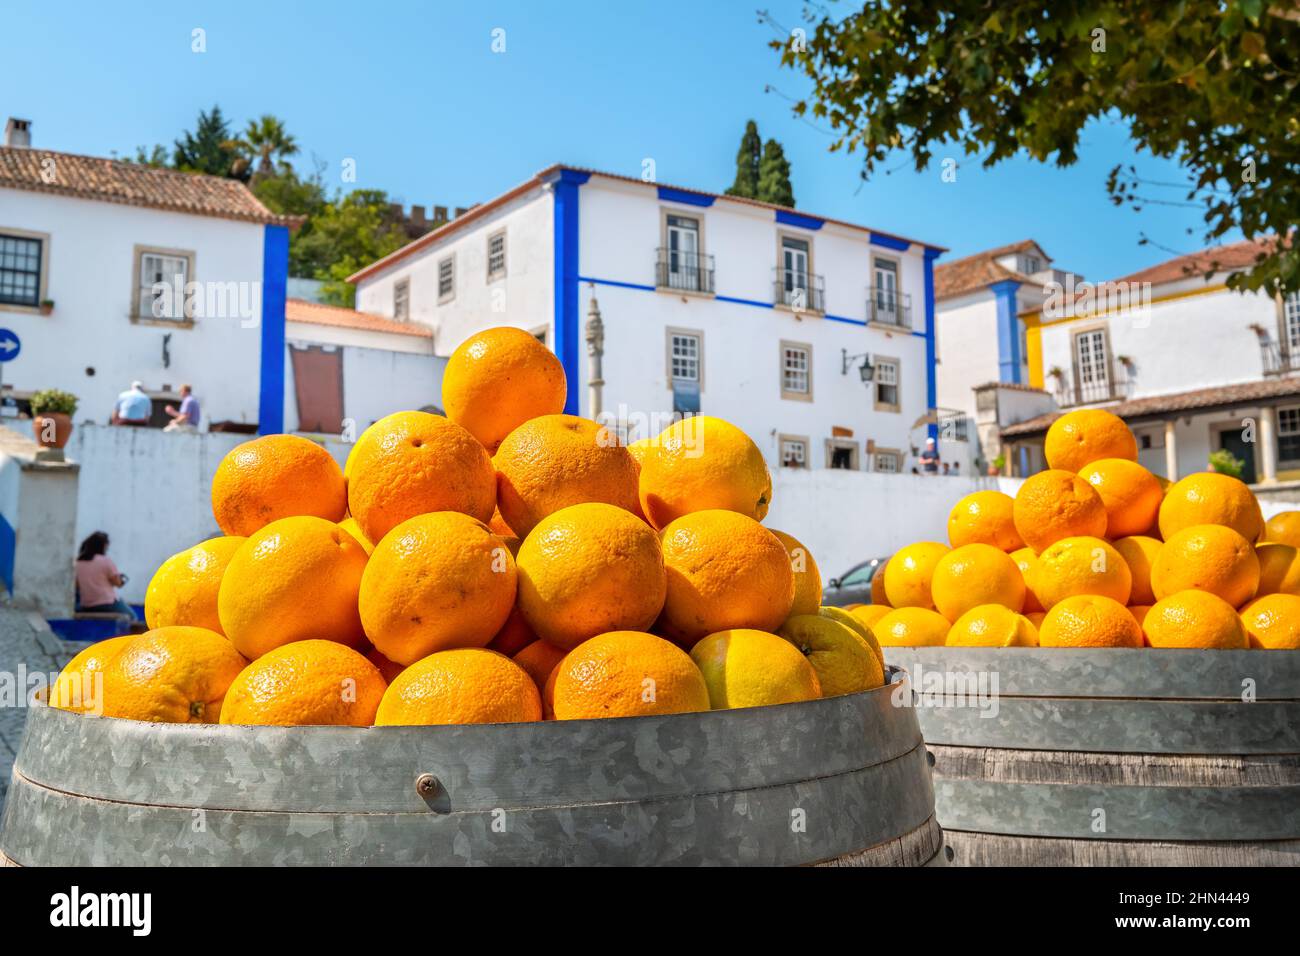 Heap of ripe oranges in a wooden barrels. Obidos, Leiria District, Portugal. Selective focus Stock Photo